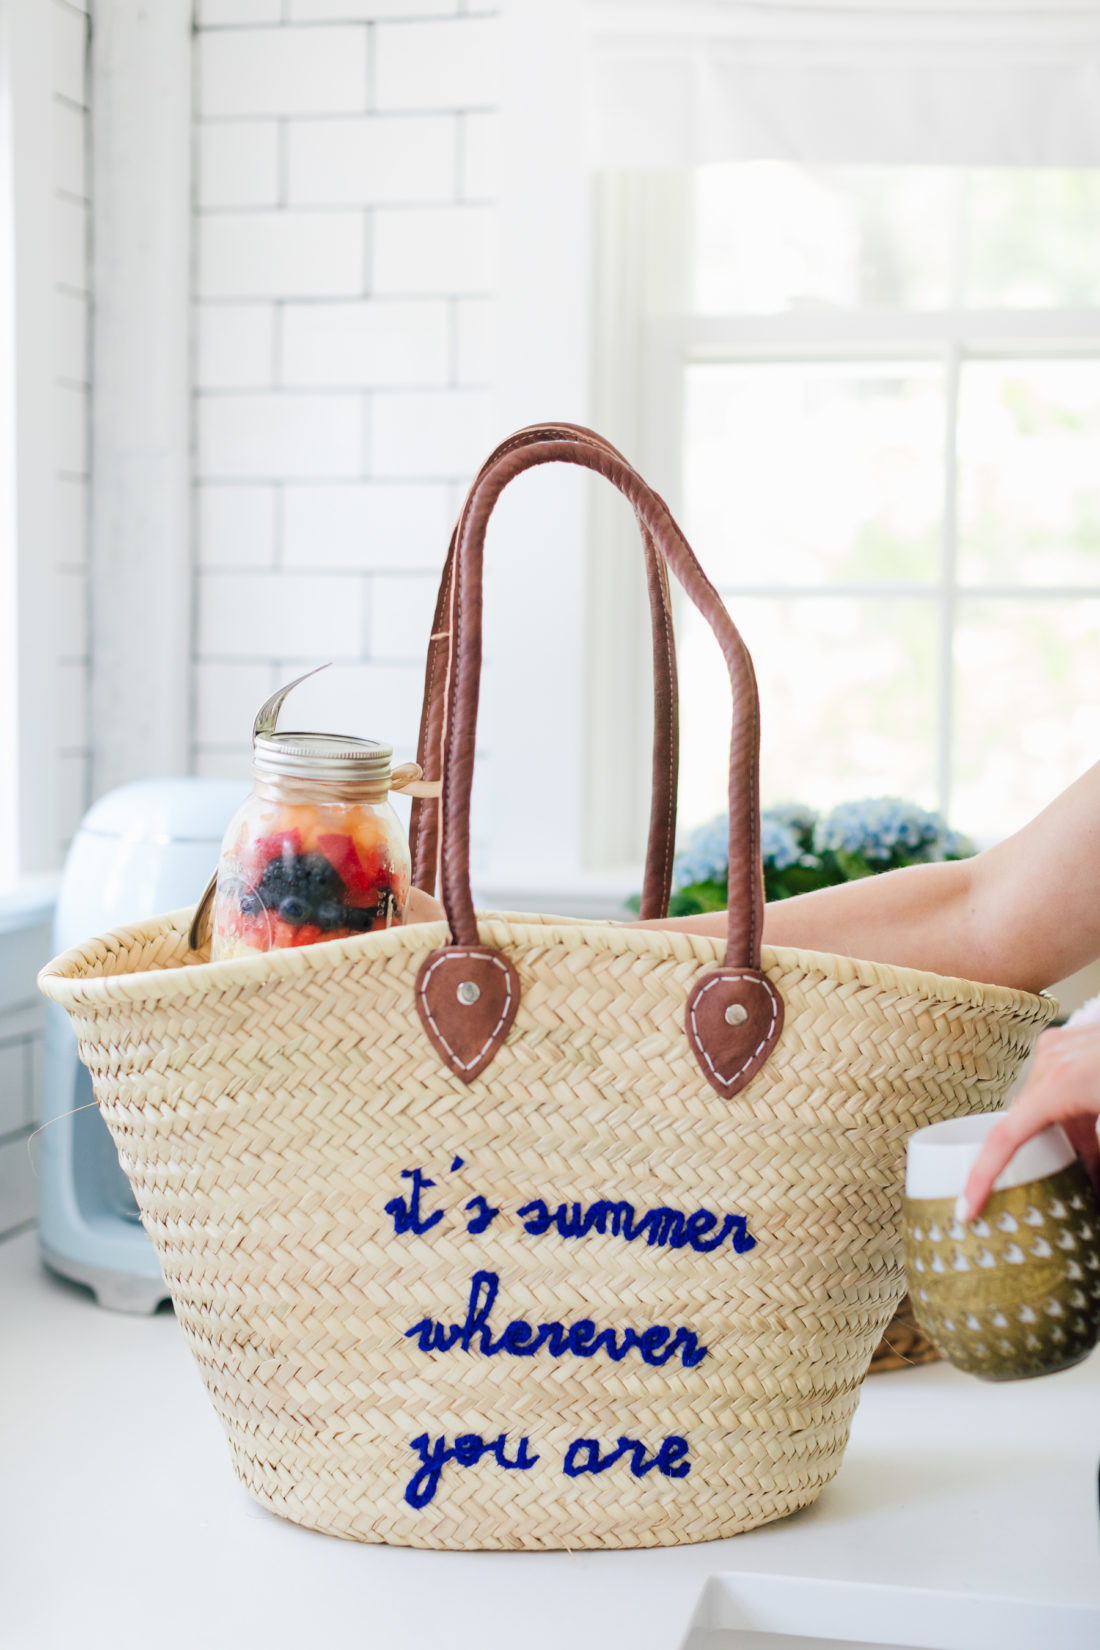 A straw bag that says It's Summer Whenever